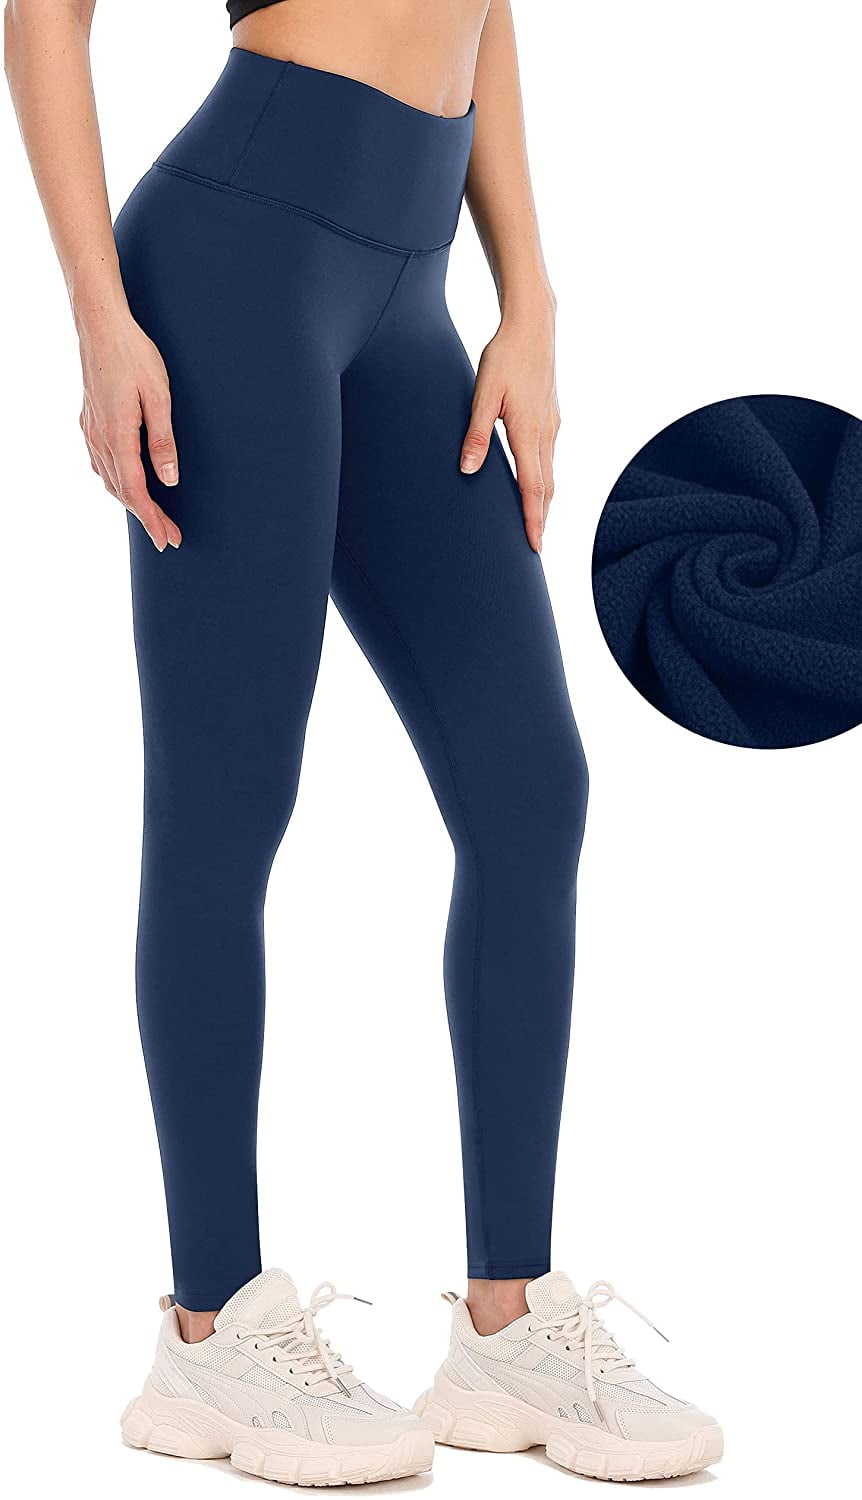 Charmo Fleece Lined Leggings Women Winter Thermal Insulated Leggings High Waist Workout Yoga Pants with Pockets f0b7ffbd 6e4e 4570 92ff e900c026f57e.be6e9264953992dd5169afdc8b124e0f